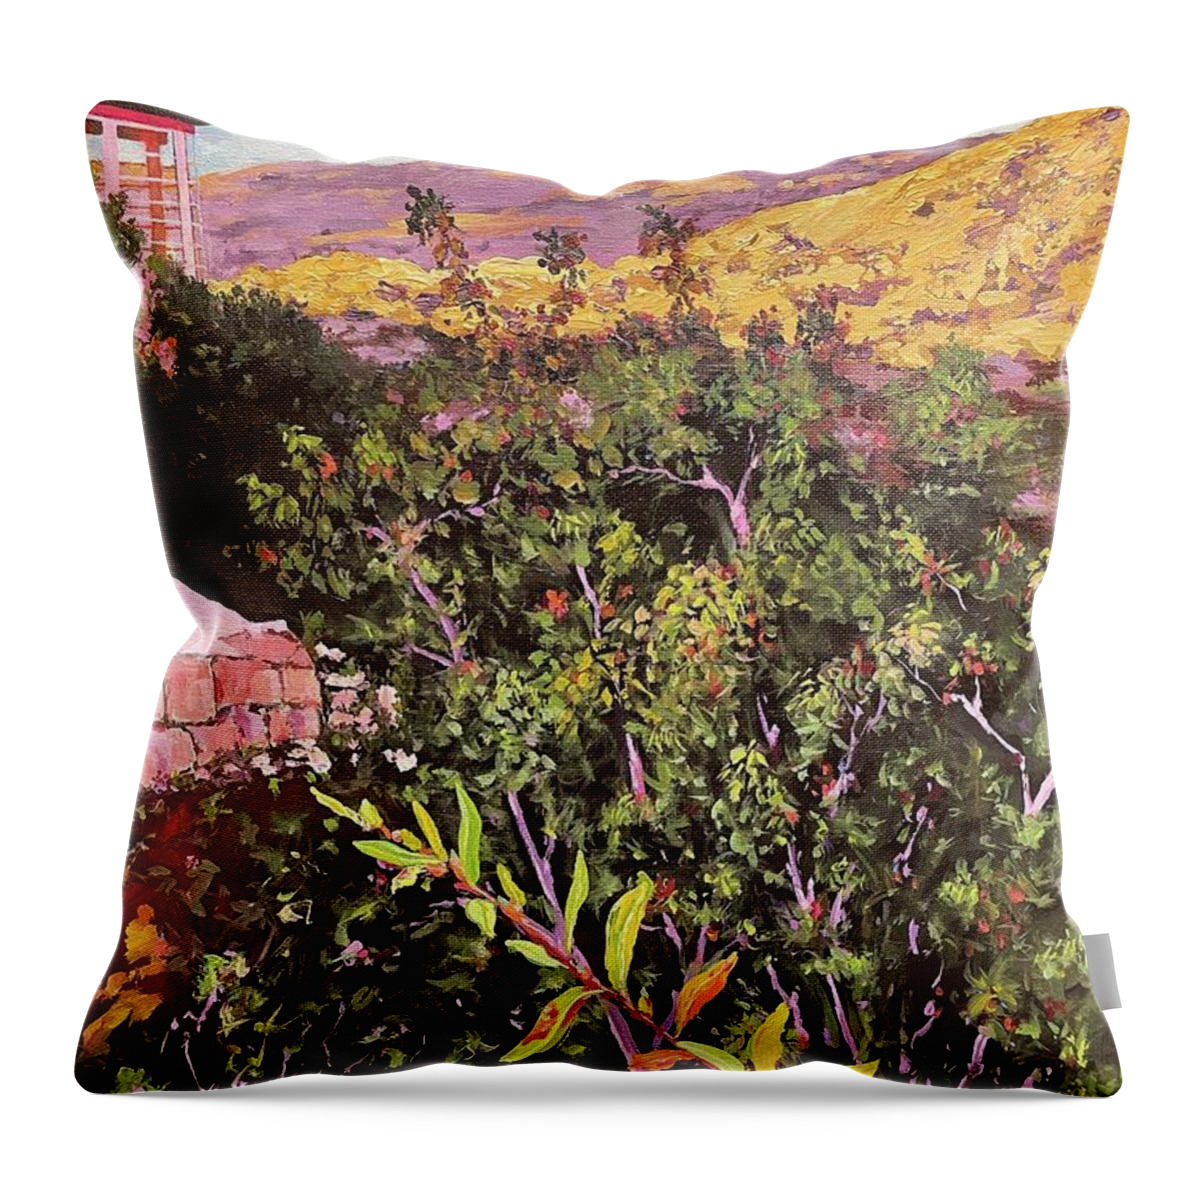 Magical Throw Pillow featuring the painting Magical combo by Ray Khalife